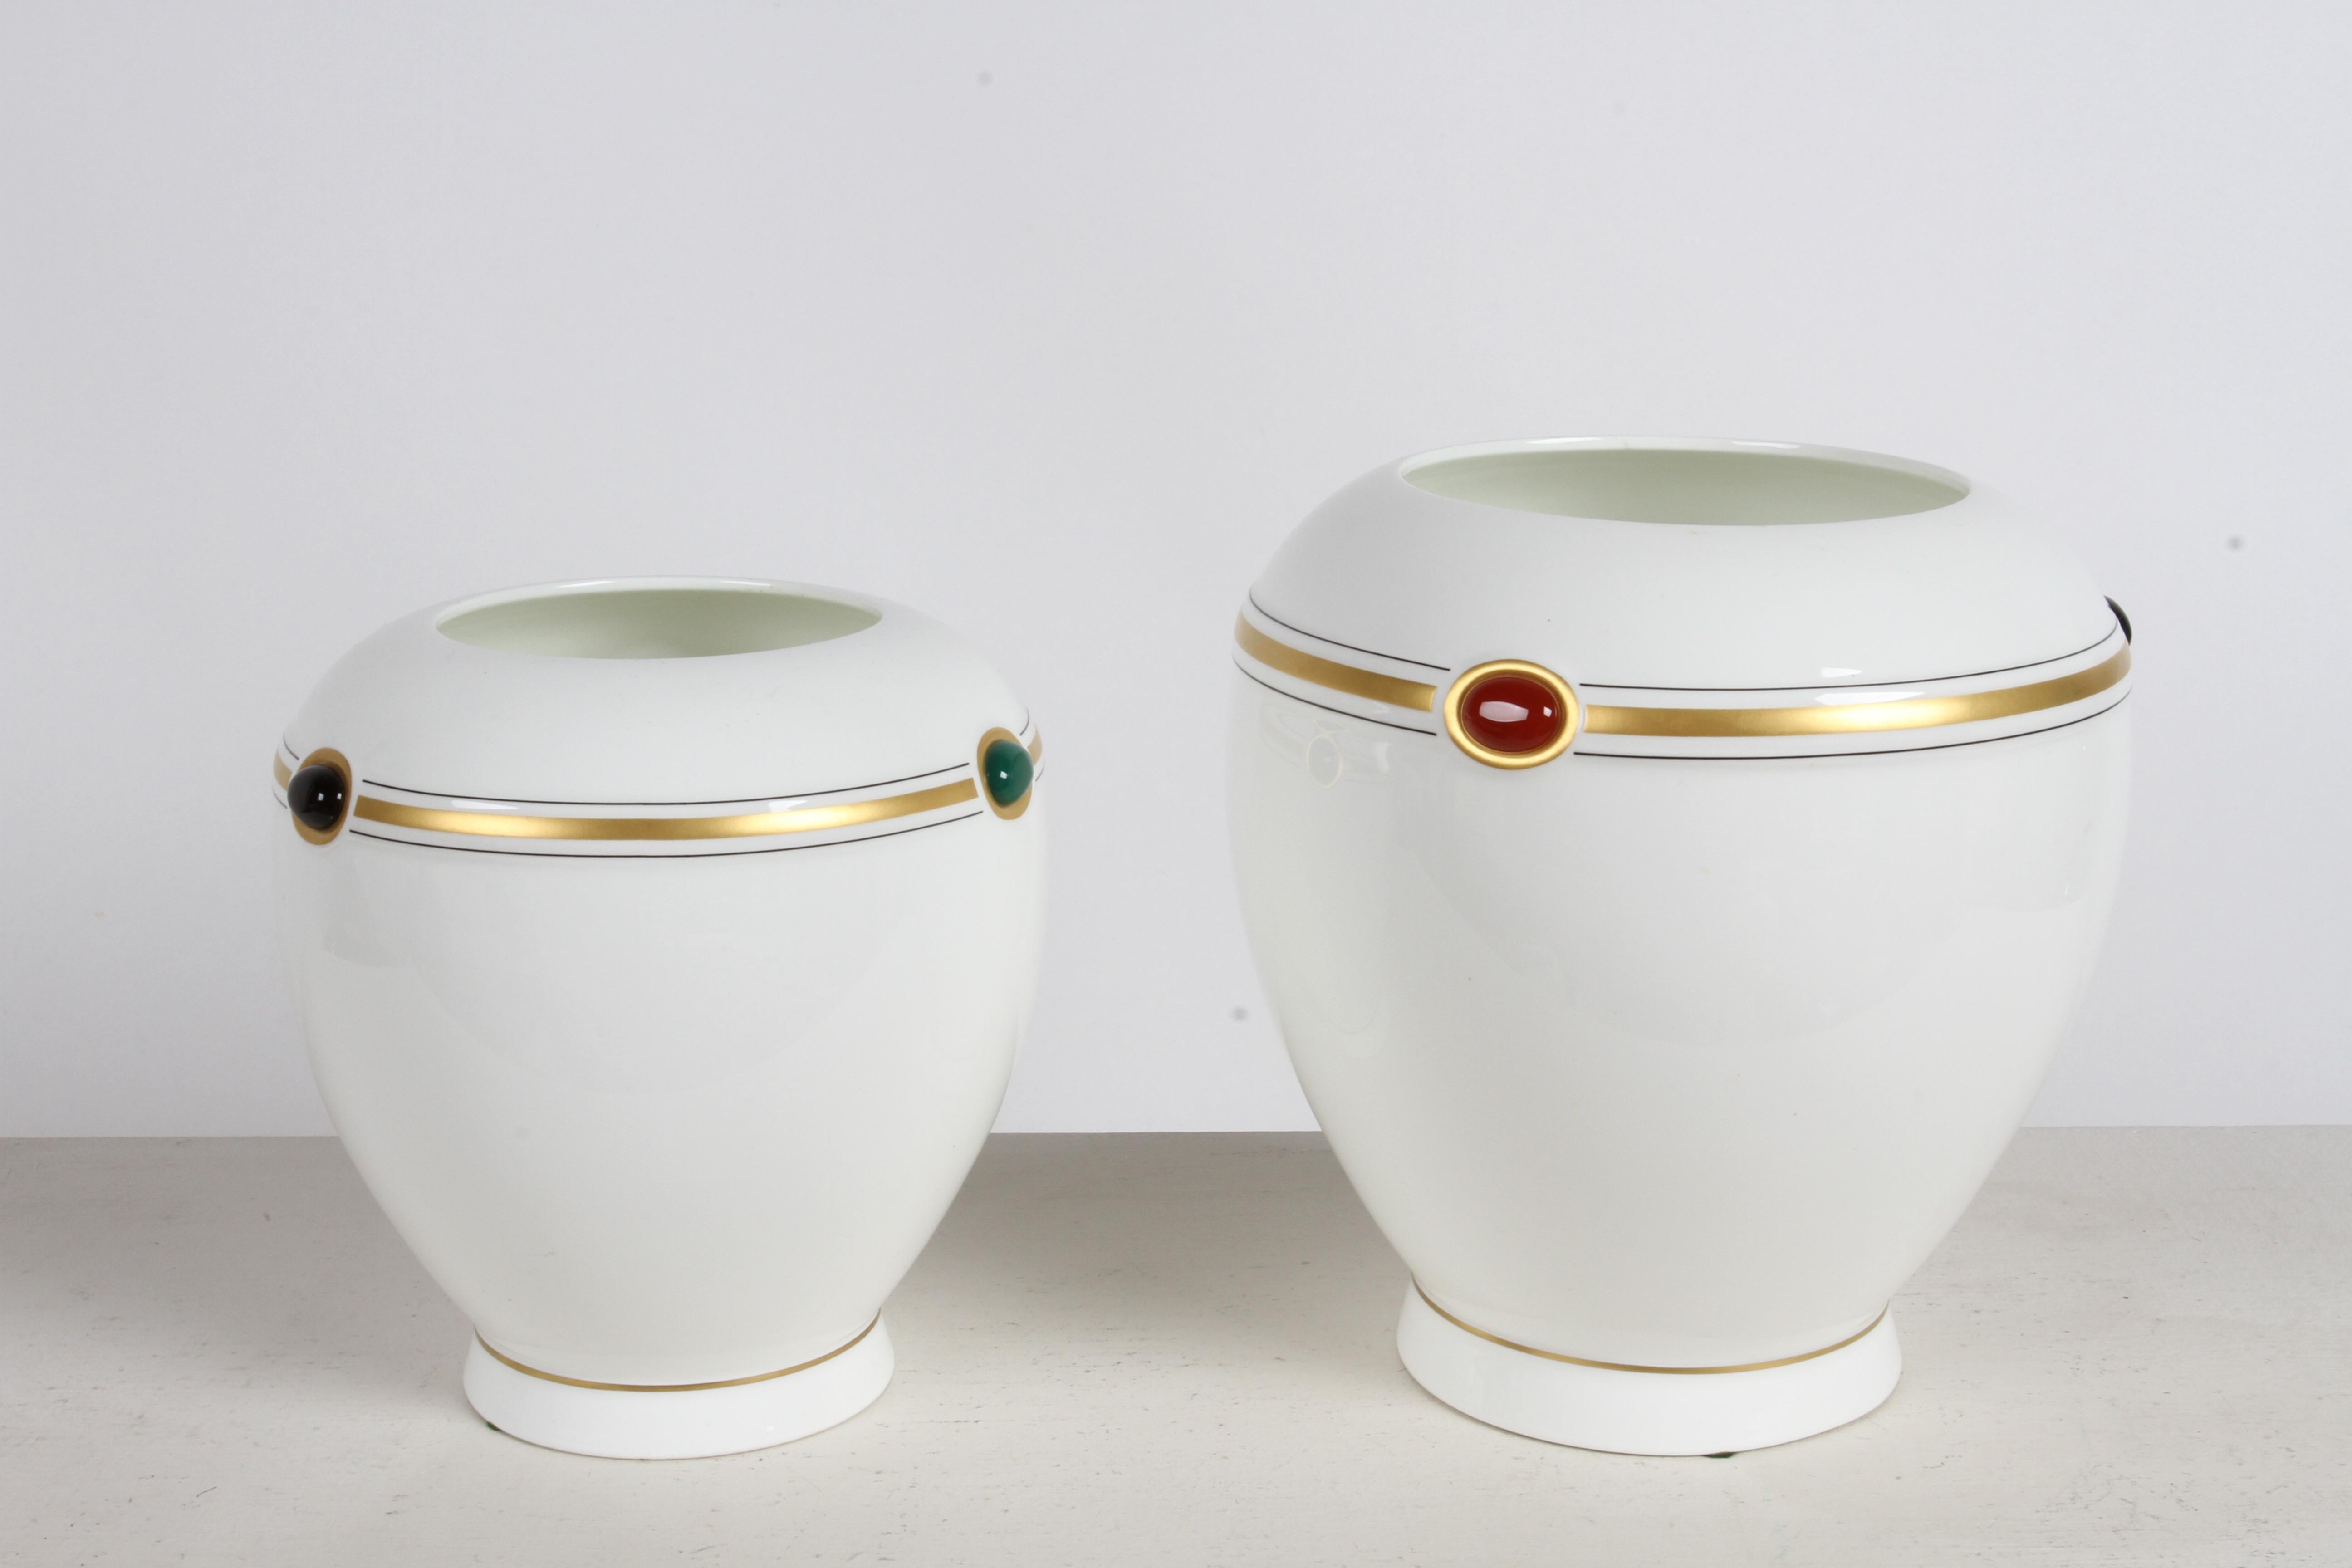 Pair of Villeroy & Boch vases / urns 'Bijou' designed by Paloma Picasso in the late 1970s  Bone china, bulbous form with red. green and blue colored jewel stones and gold stripe decoration. Signed on base Paloma Picasso  'Bijou' Bone China Henrich :